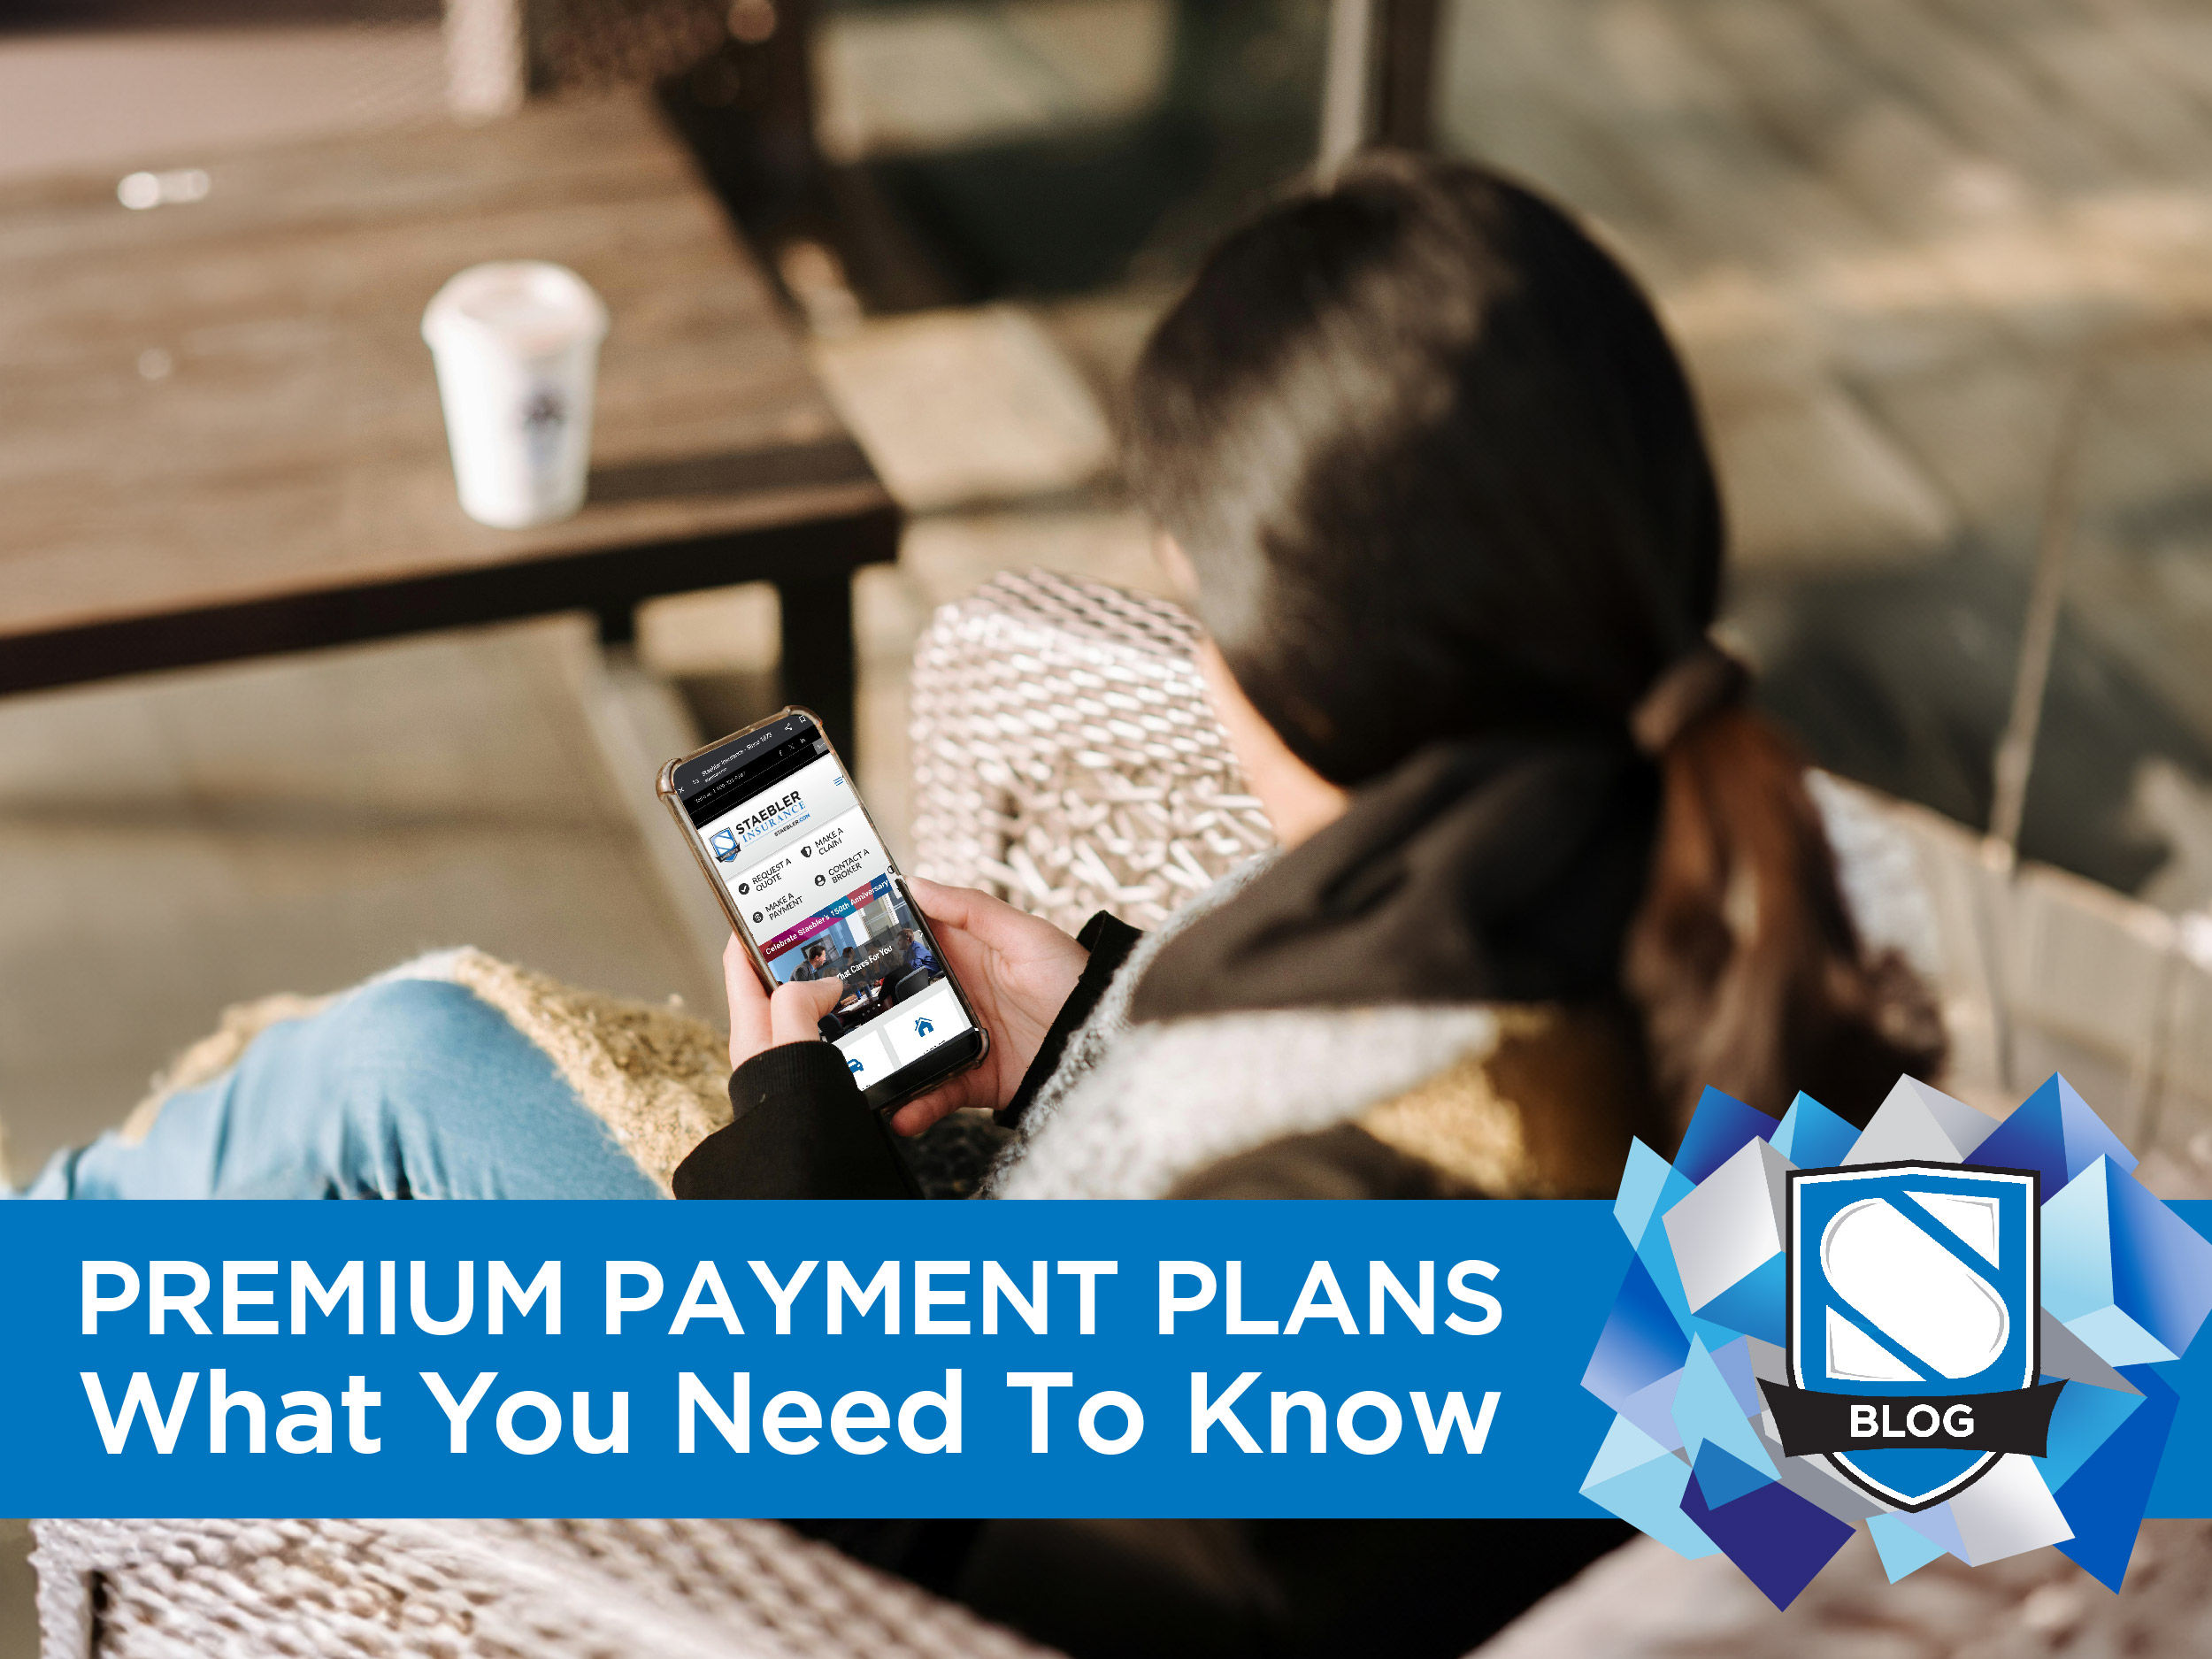 How do Insurance Policy Premium Payment Plans Work?